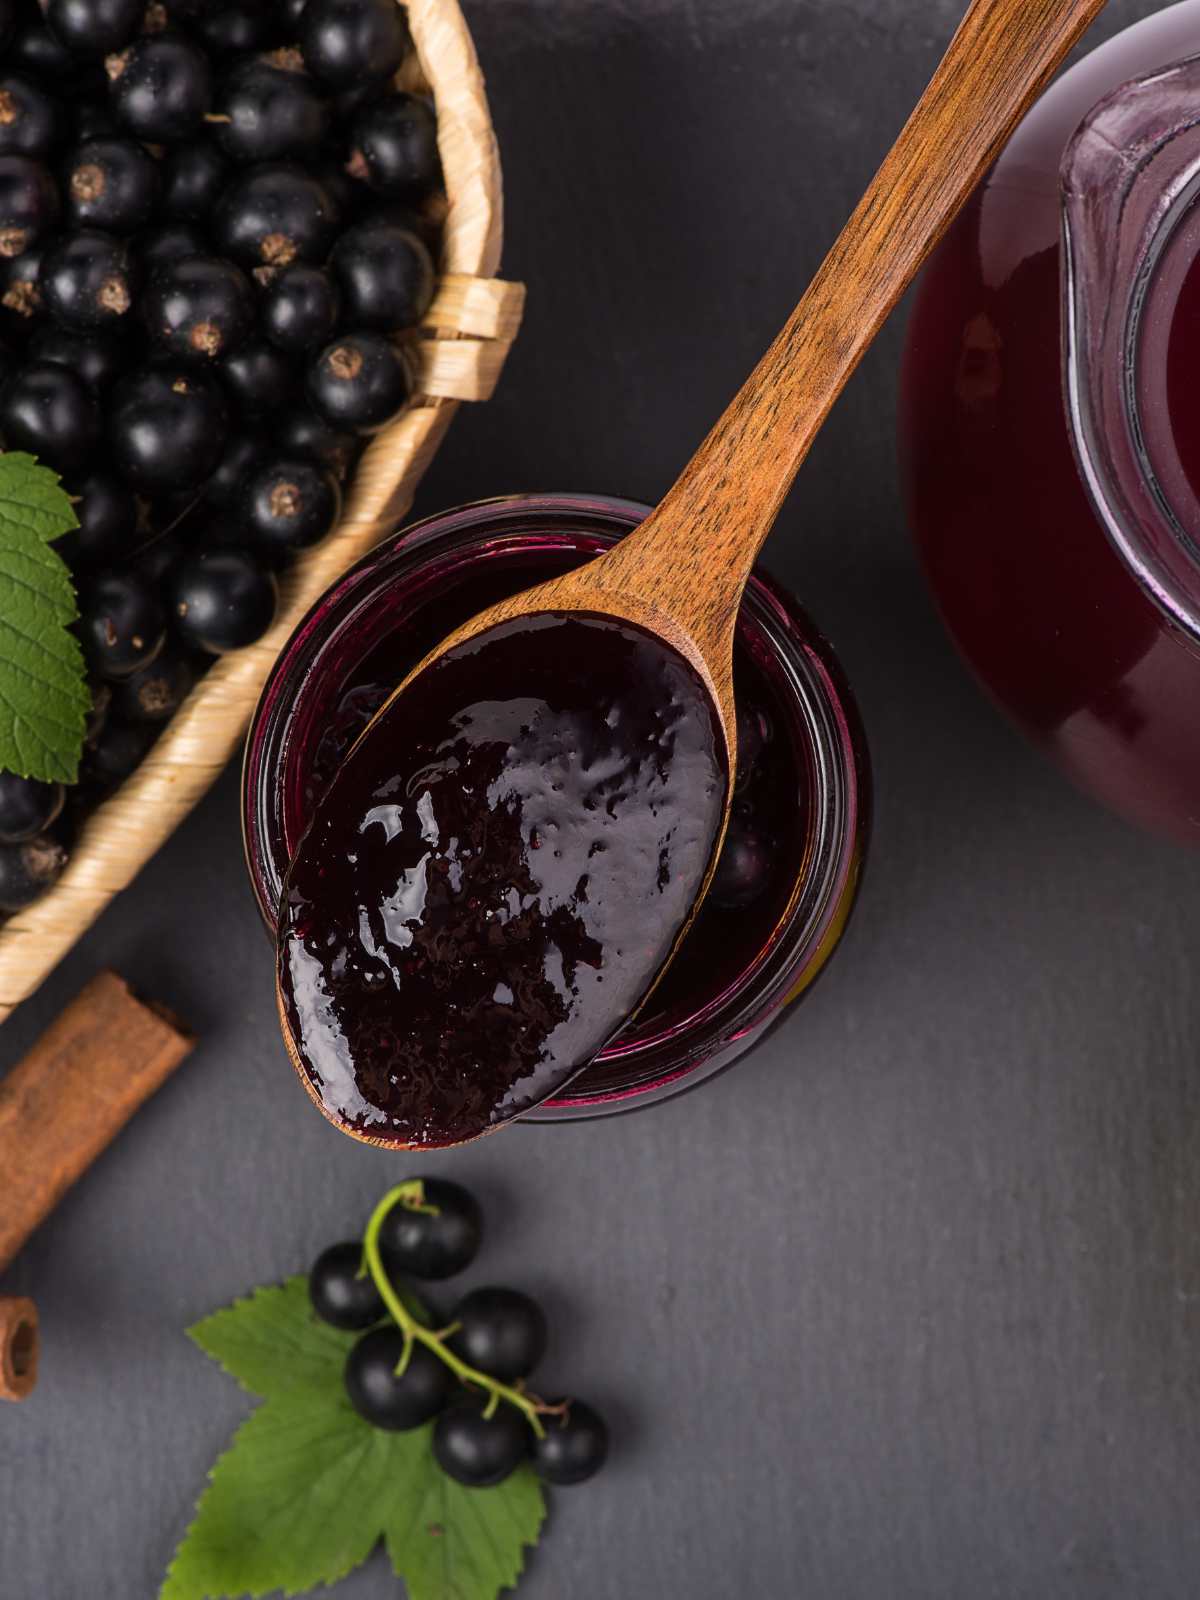 A spoonful of cassis syrup next to a basket of blackcurrants.